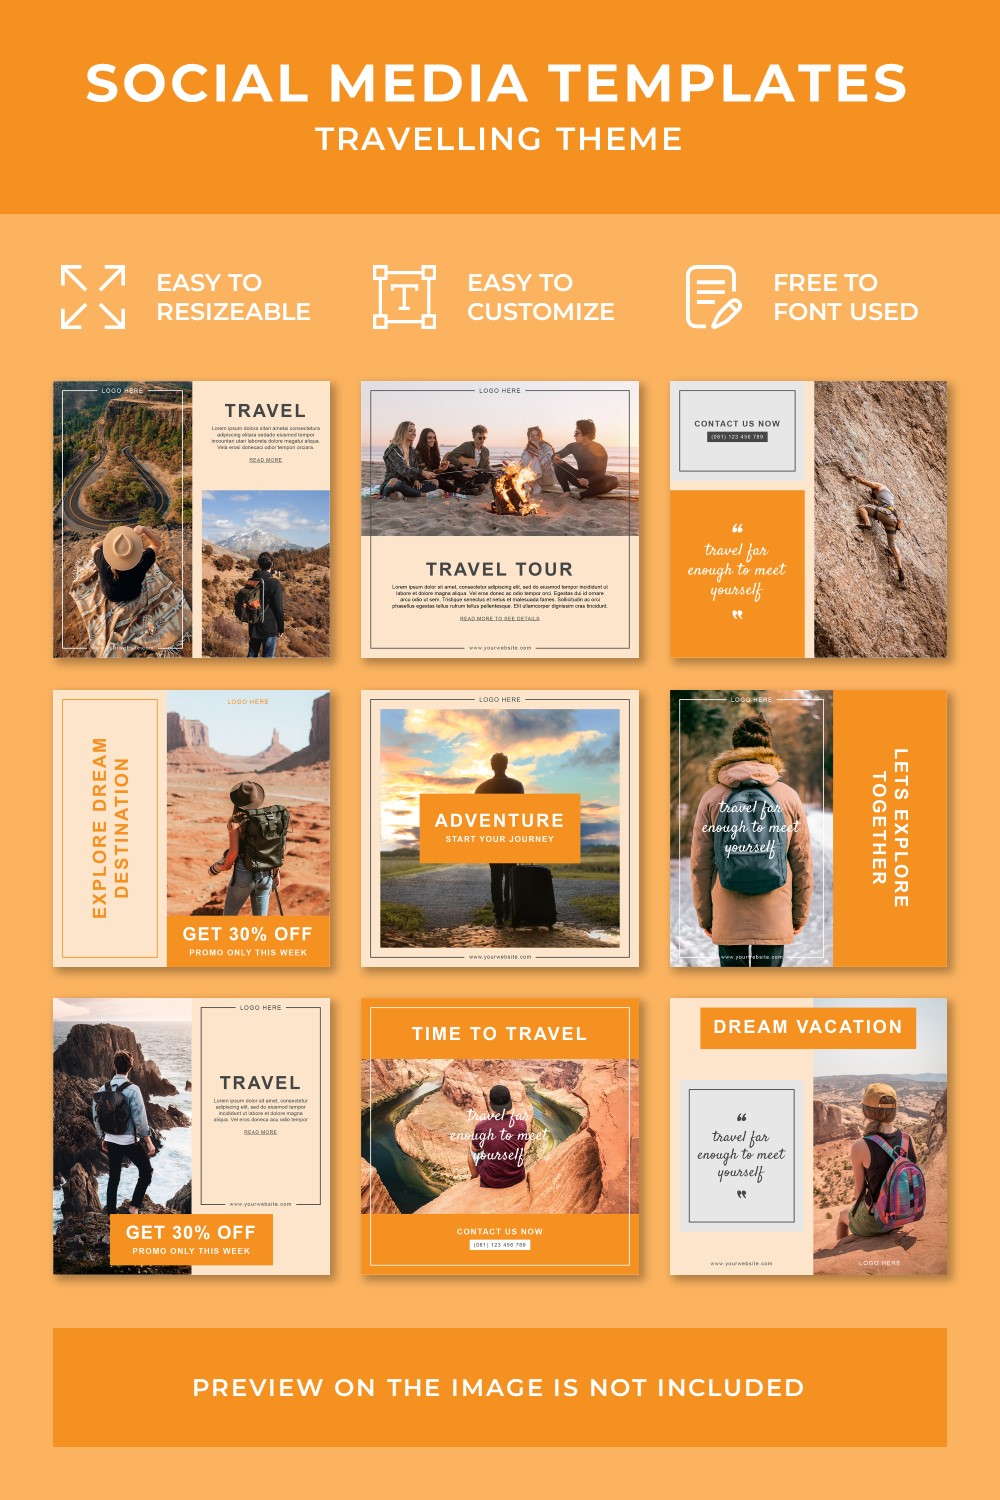 Travelling Theme Social Media Post Templates Pinterest Collage image.